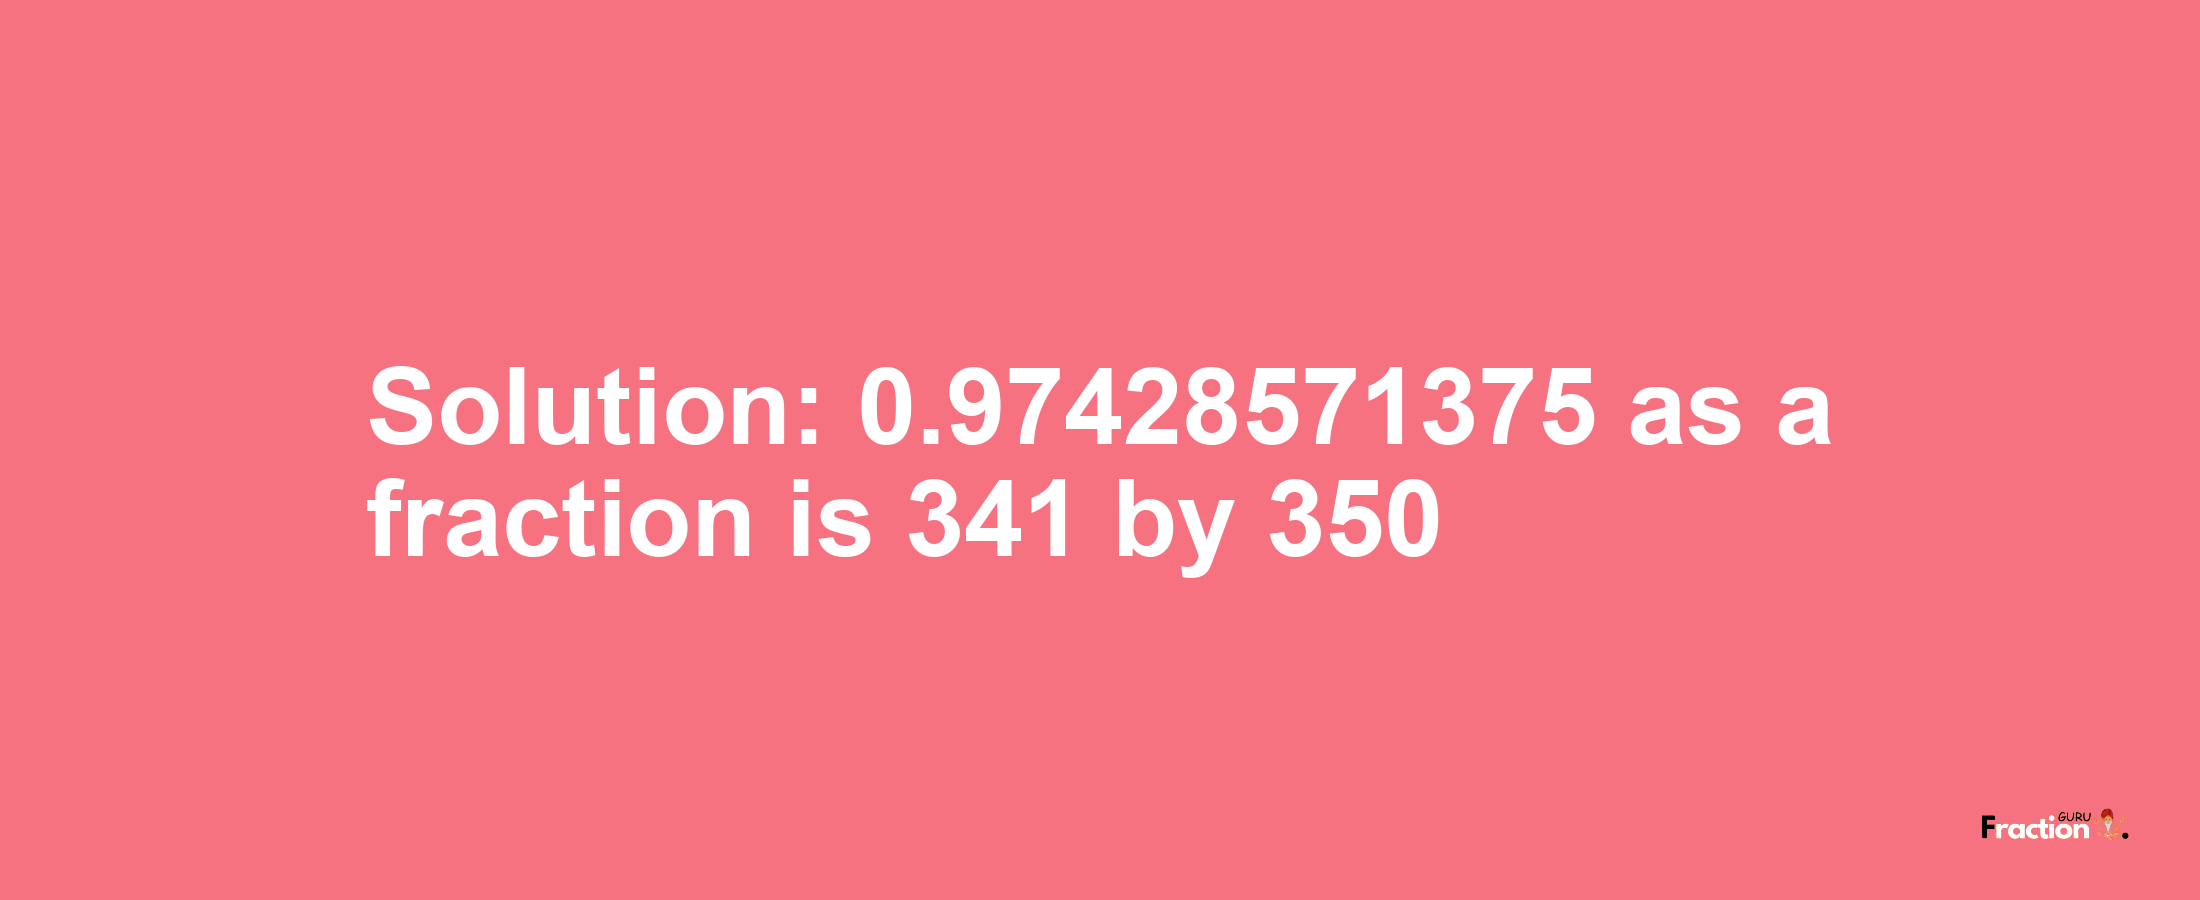 Solution:0.97428571375 as a fraction is 341/350